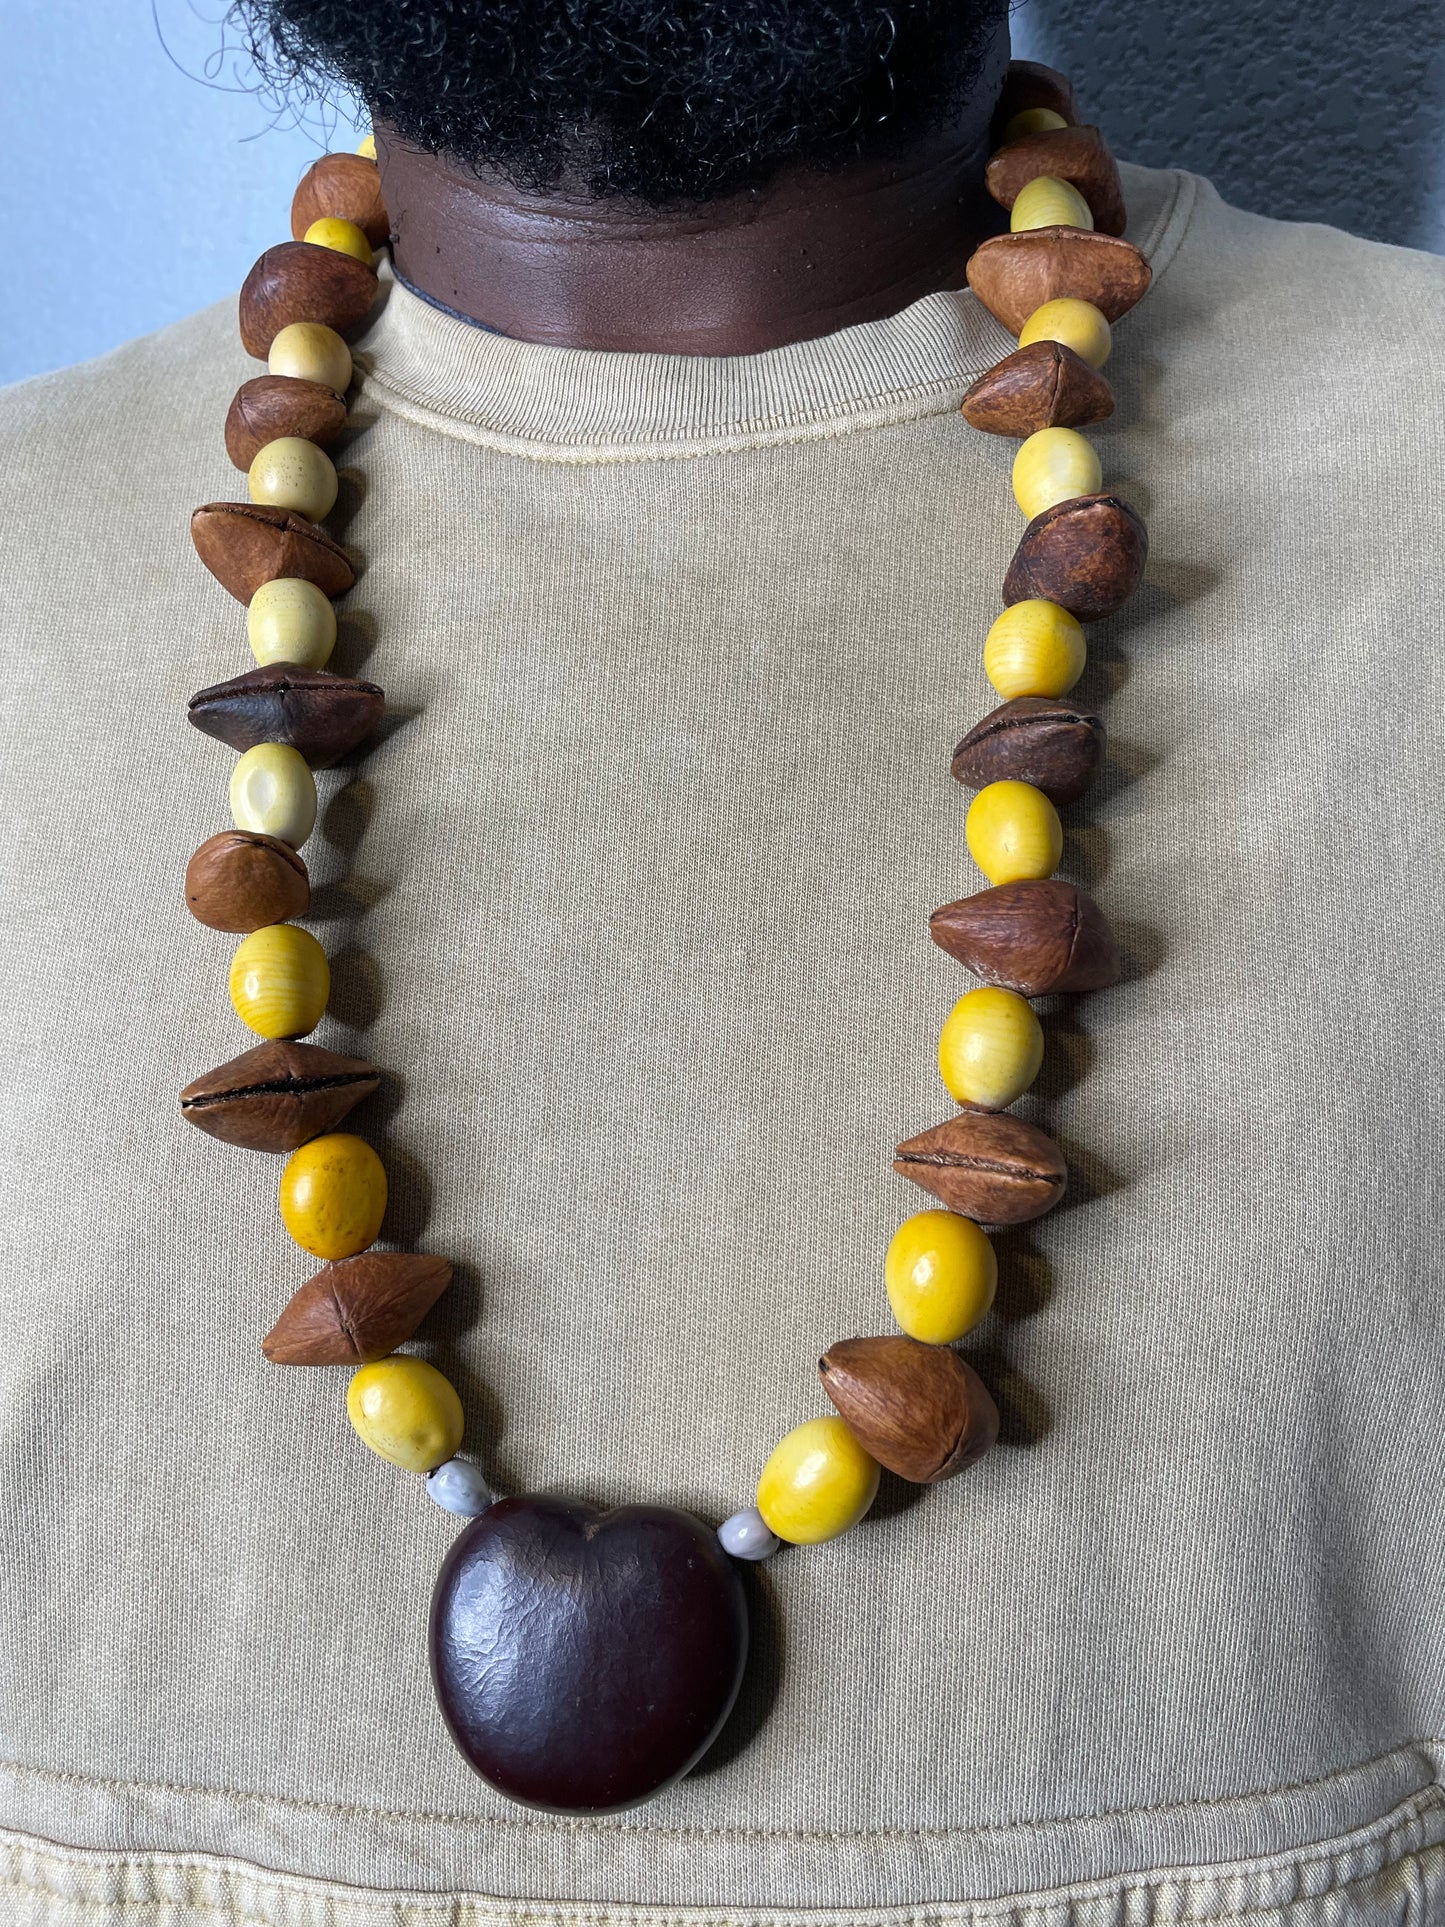 Handcrafted | Lucky seeds Pendant Natural Seeds Bead Necklace